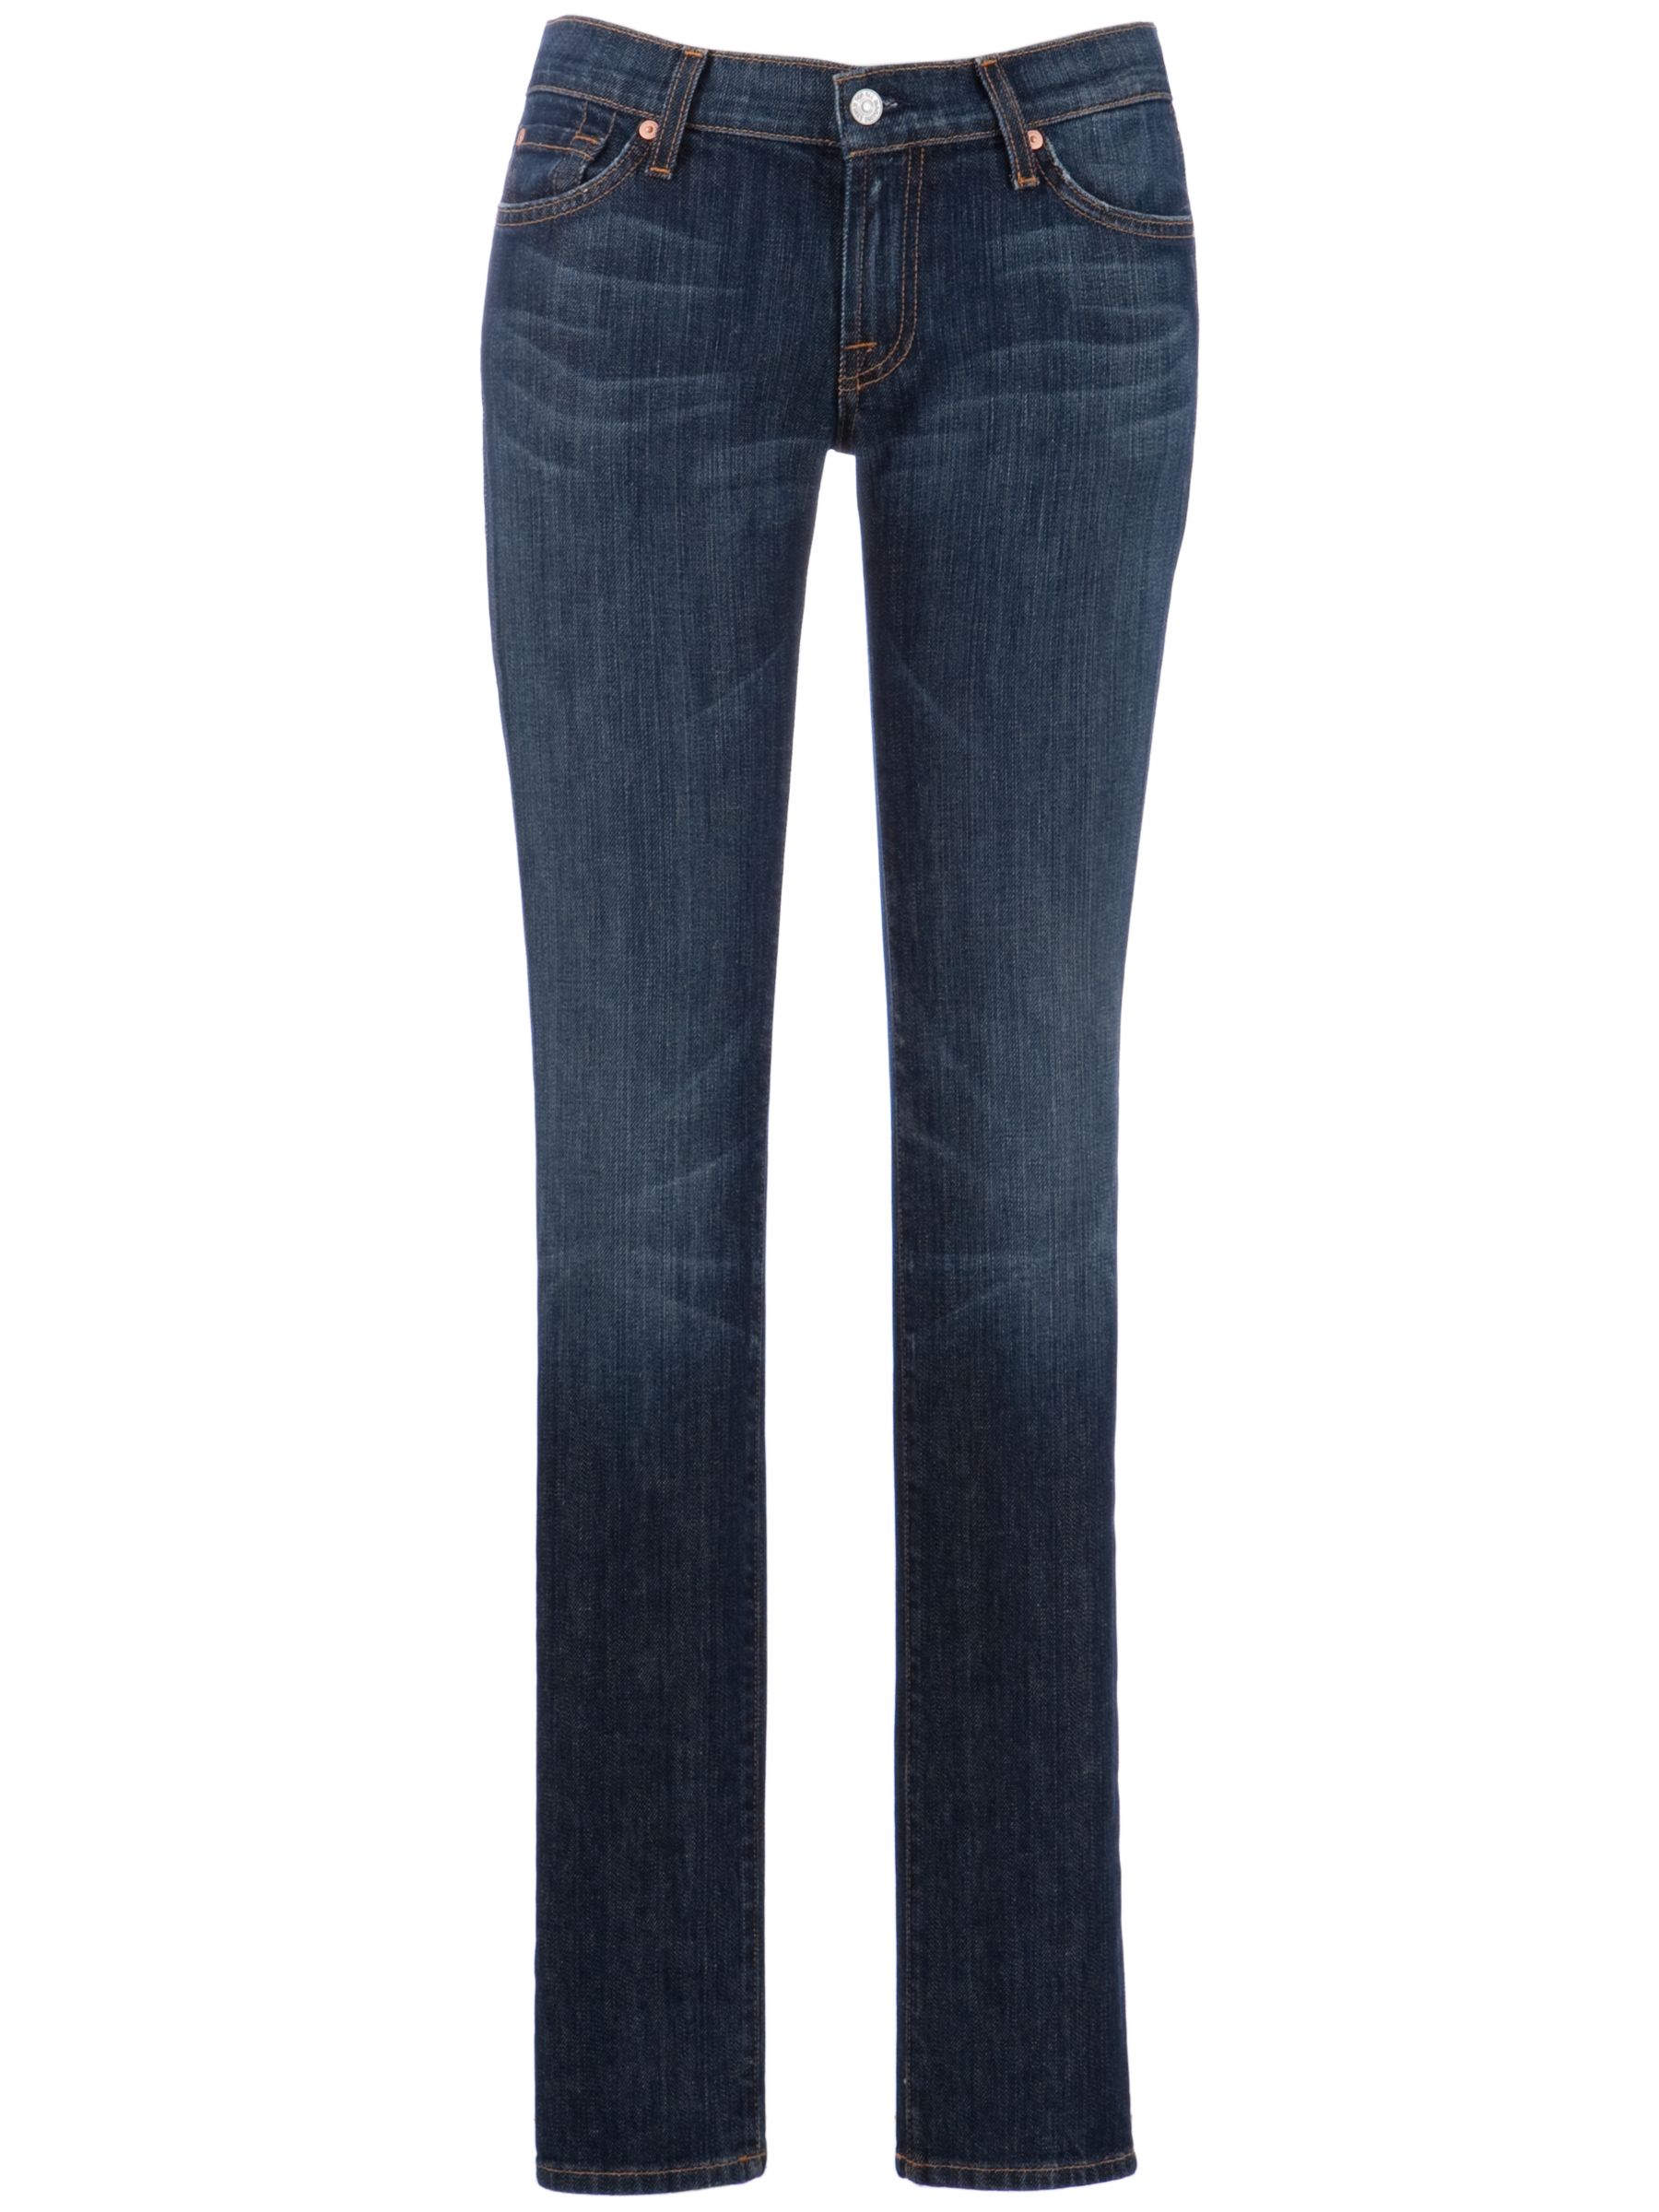 7 For All Mankind Roxanne Mid-Rise Skinny Jeans, New York Dark at John Lewis